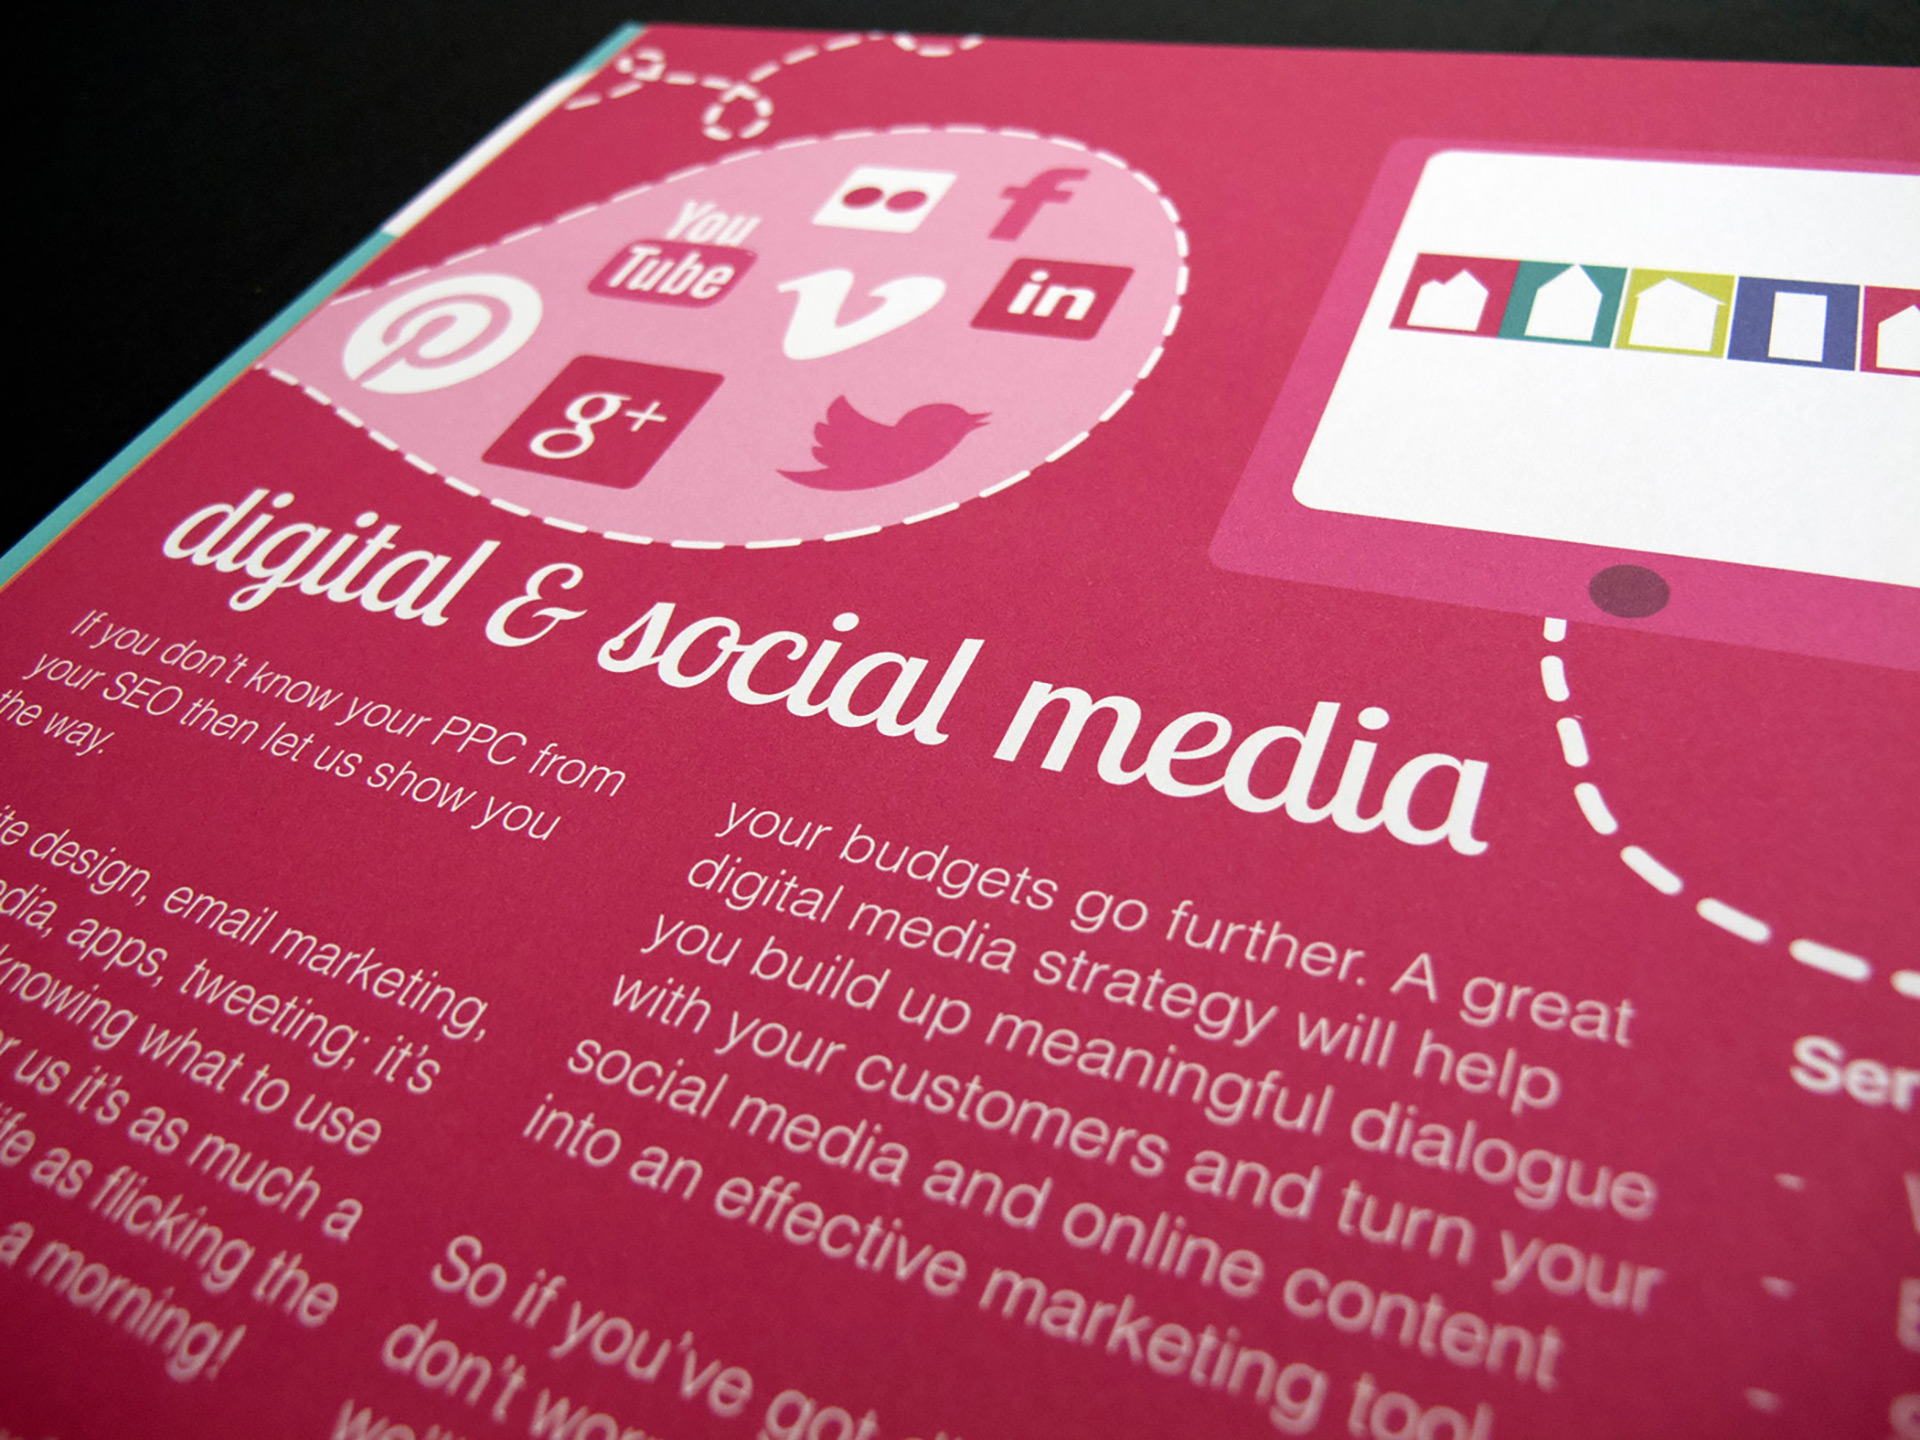 A close-up, angled photo of the digital and social media brochure page. The page is a bold pink colour with white text. Social media icons appear in a speech bubble, and there is an illustration of a tablet device. 